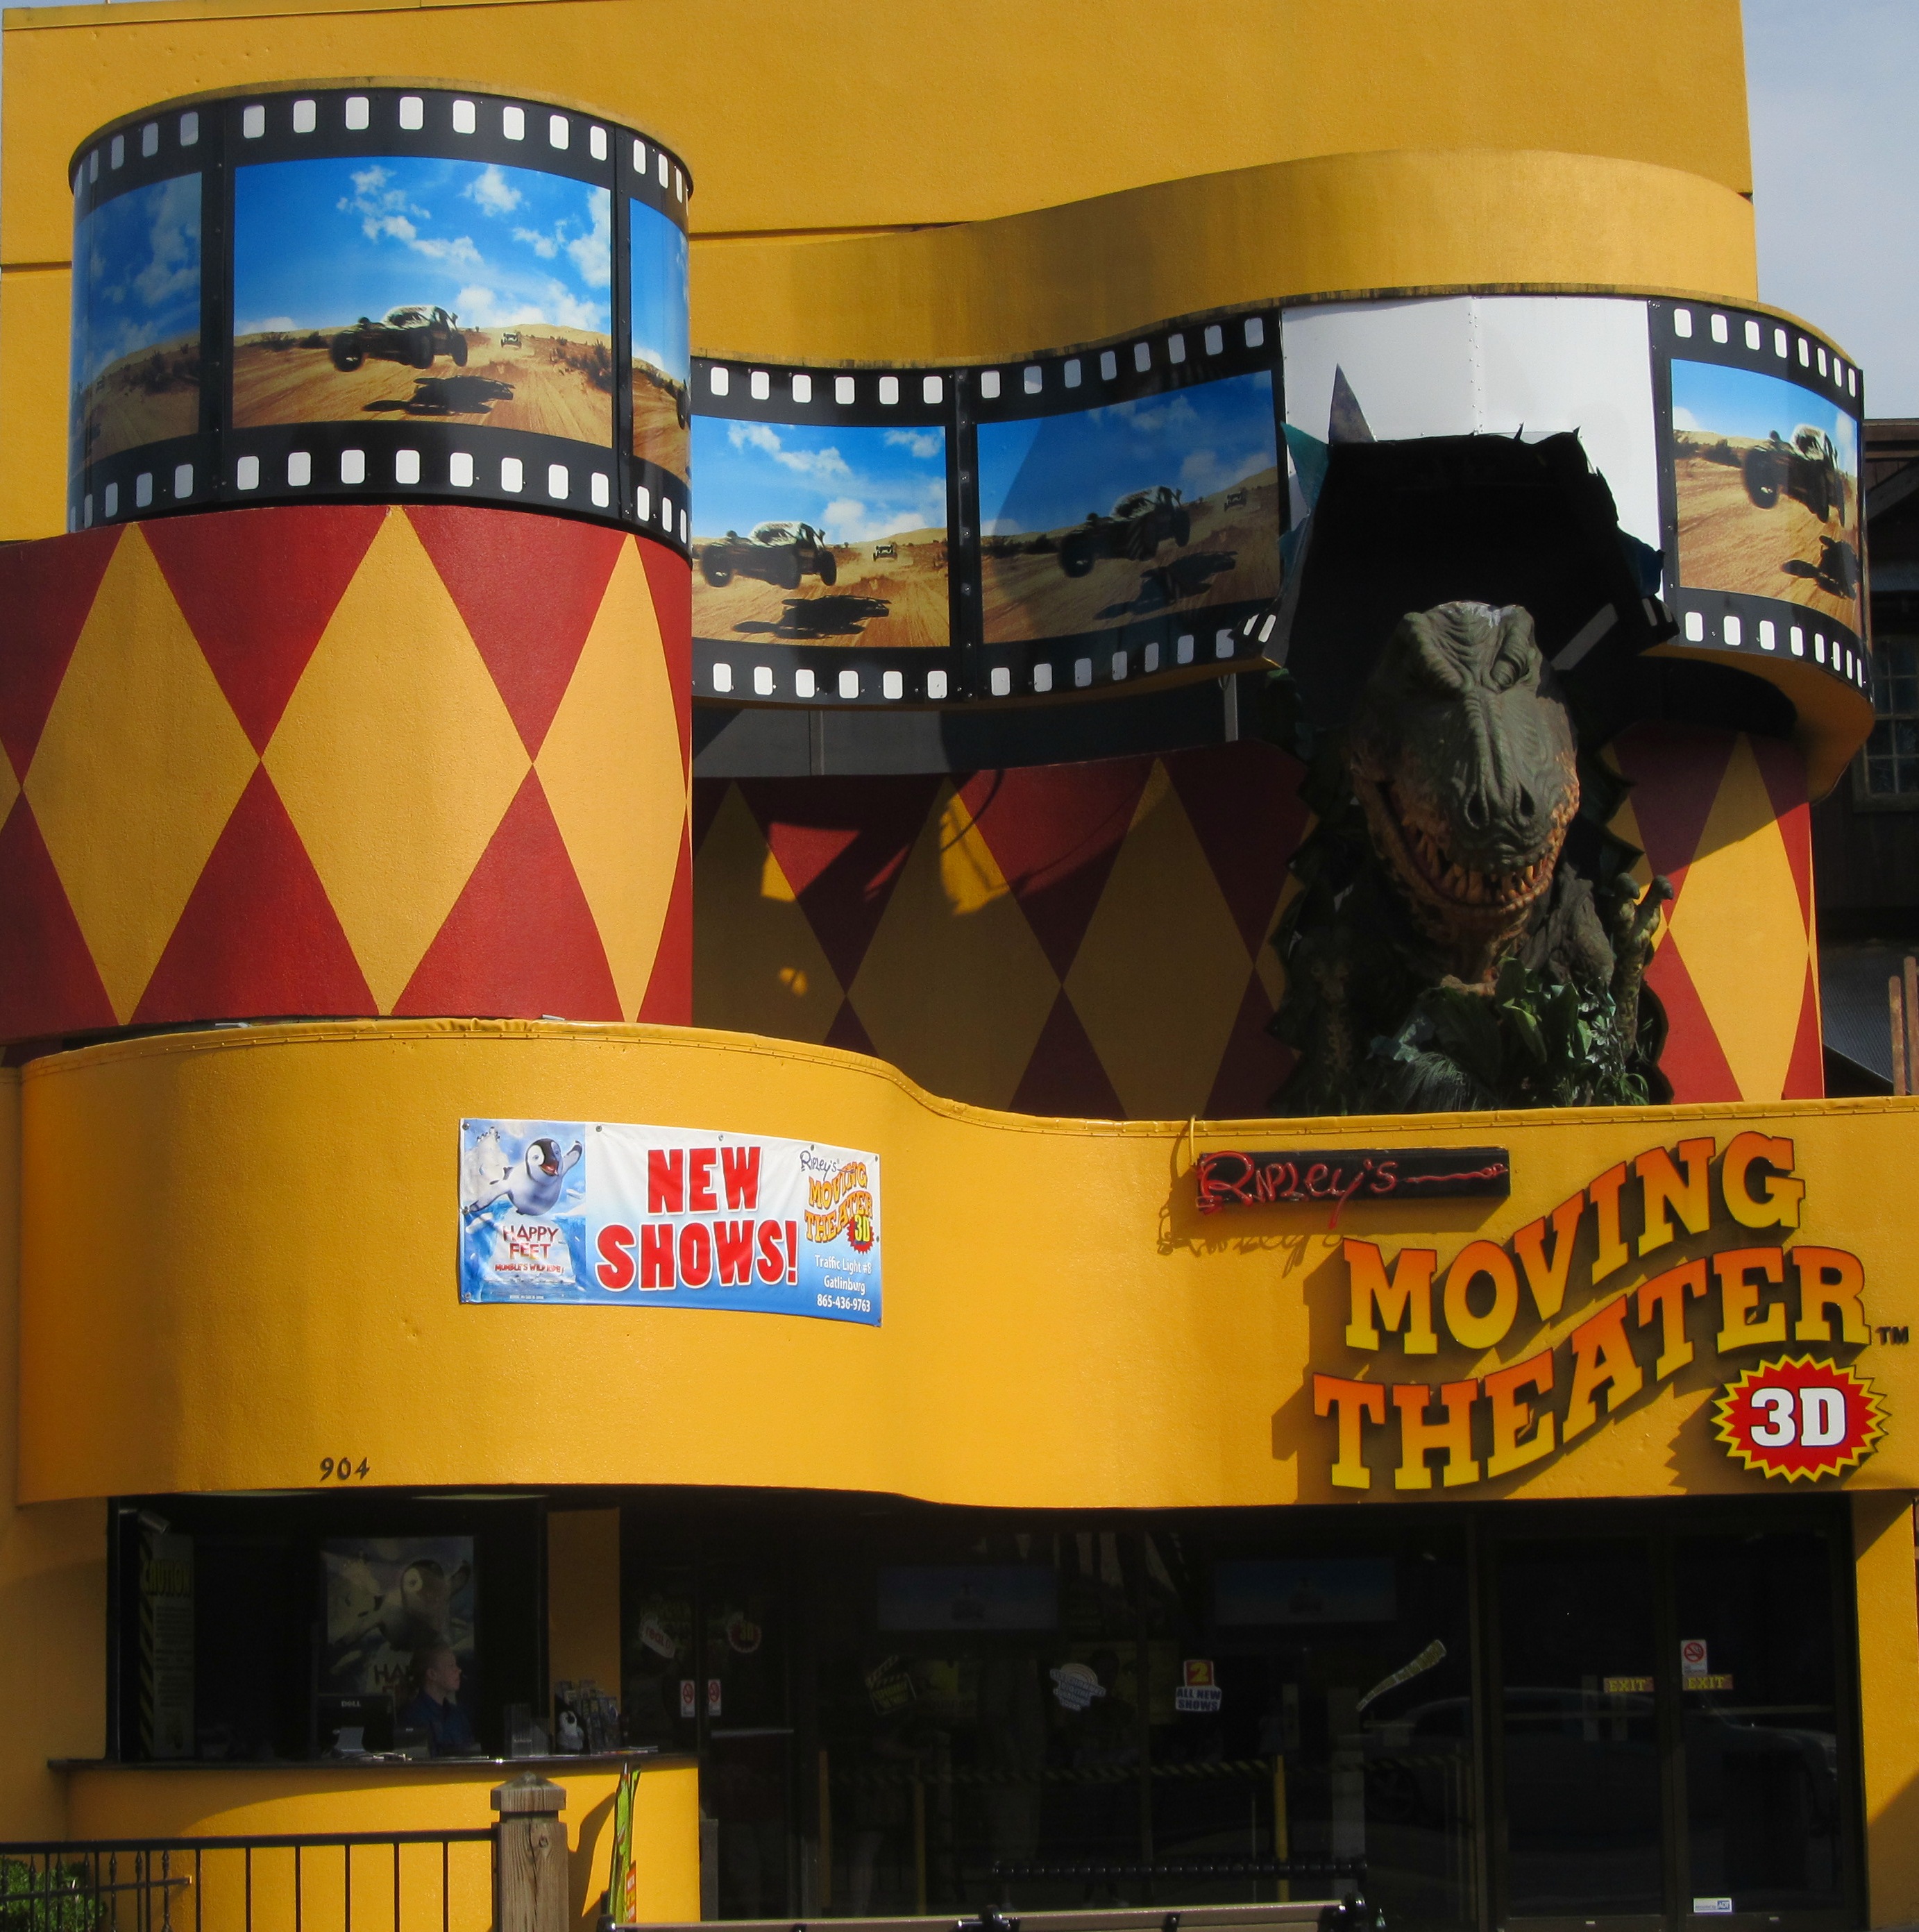 Experience lots of "thrills and spills" inside Ripley's Moving Theater!